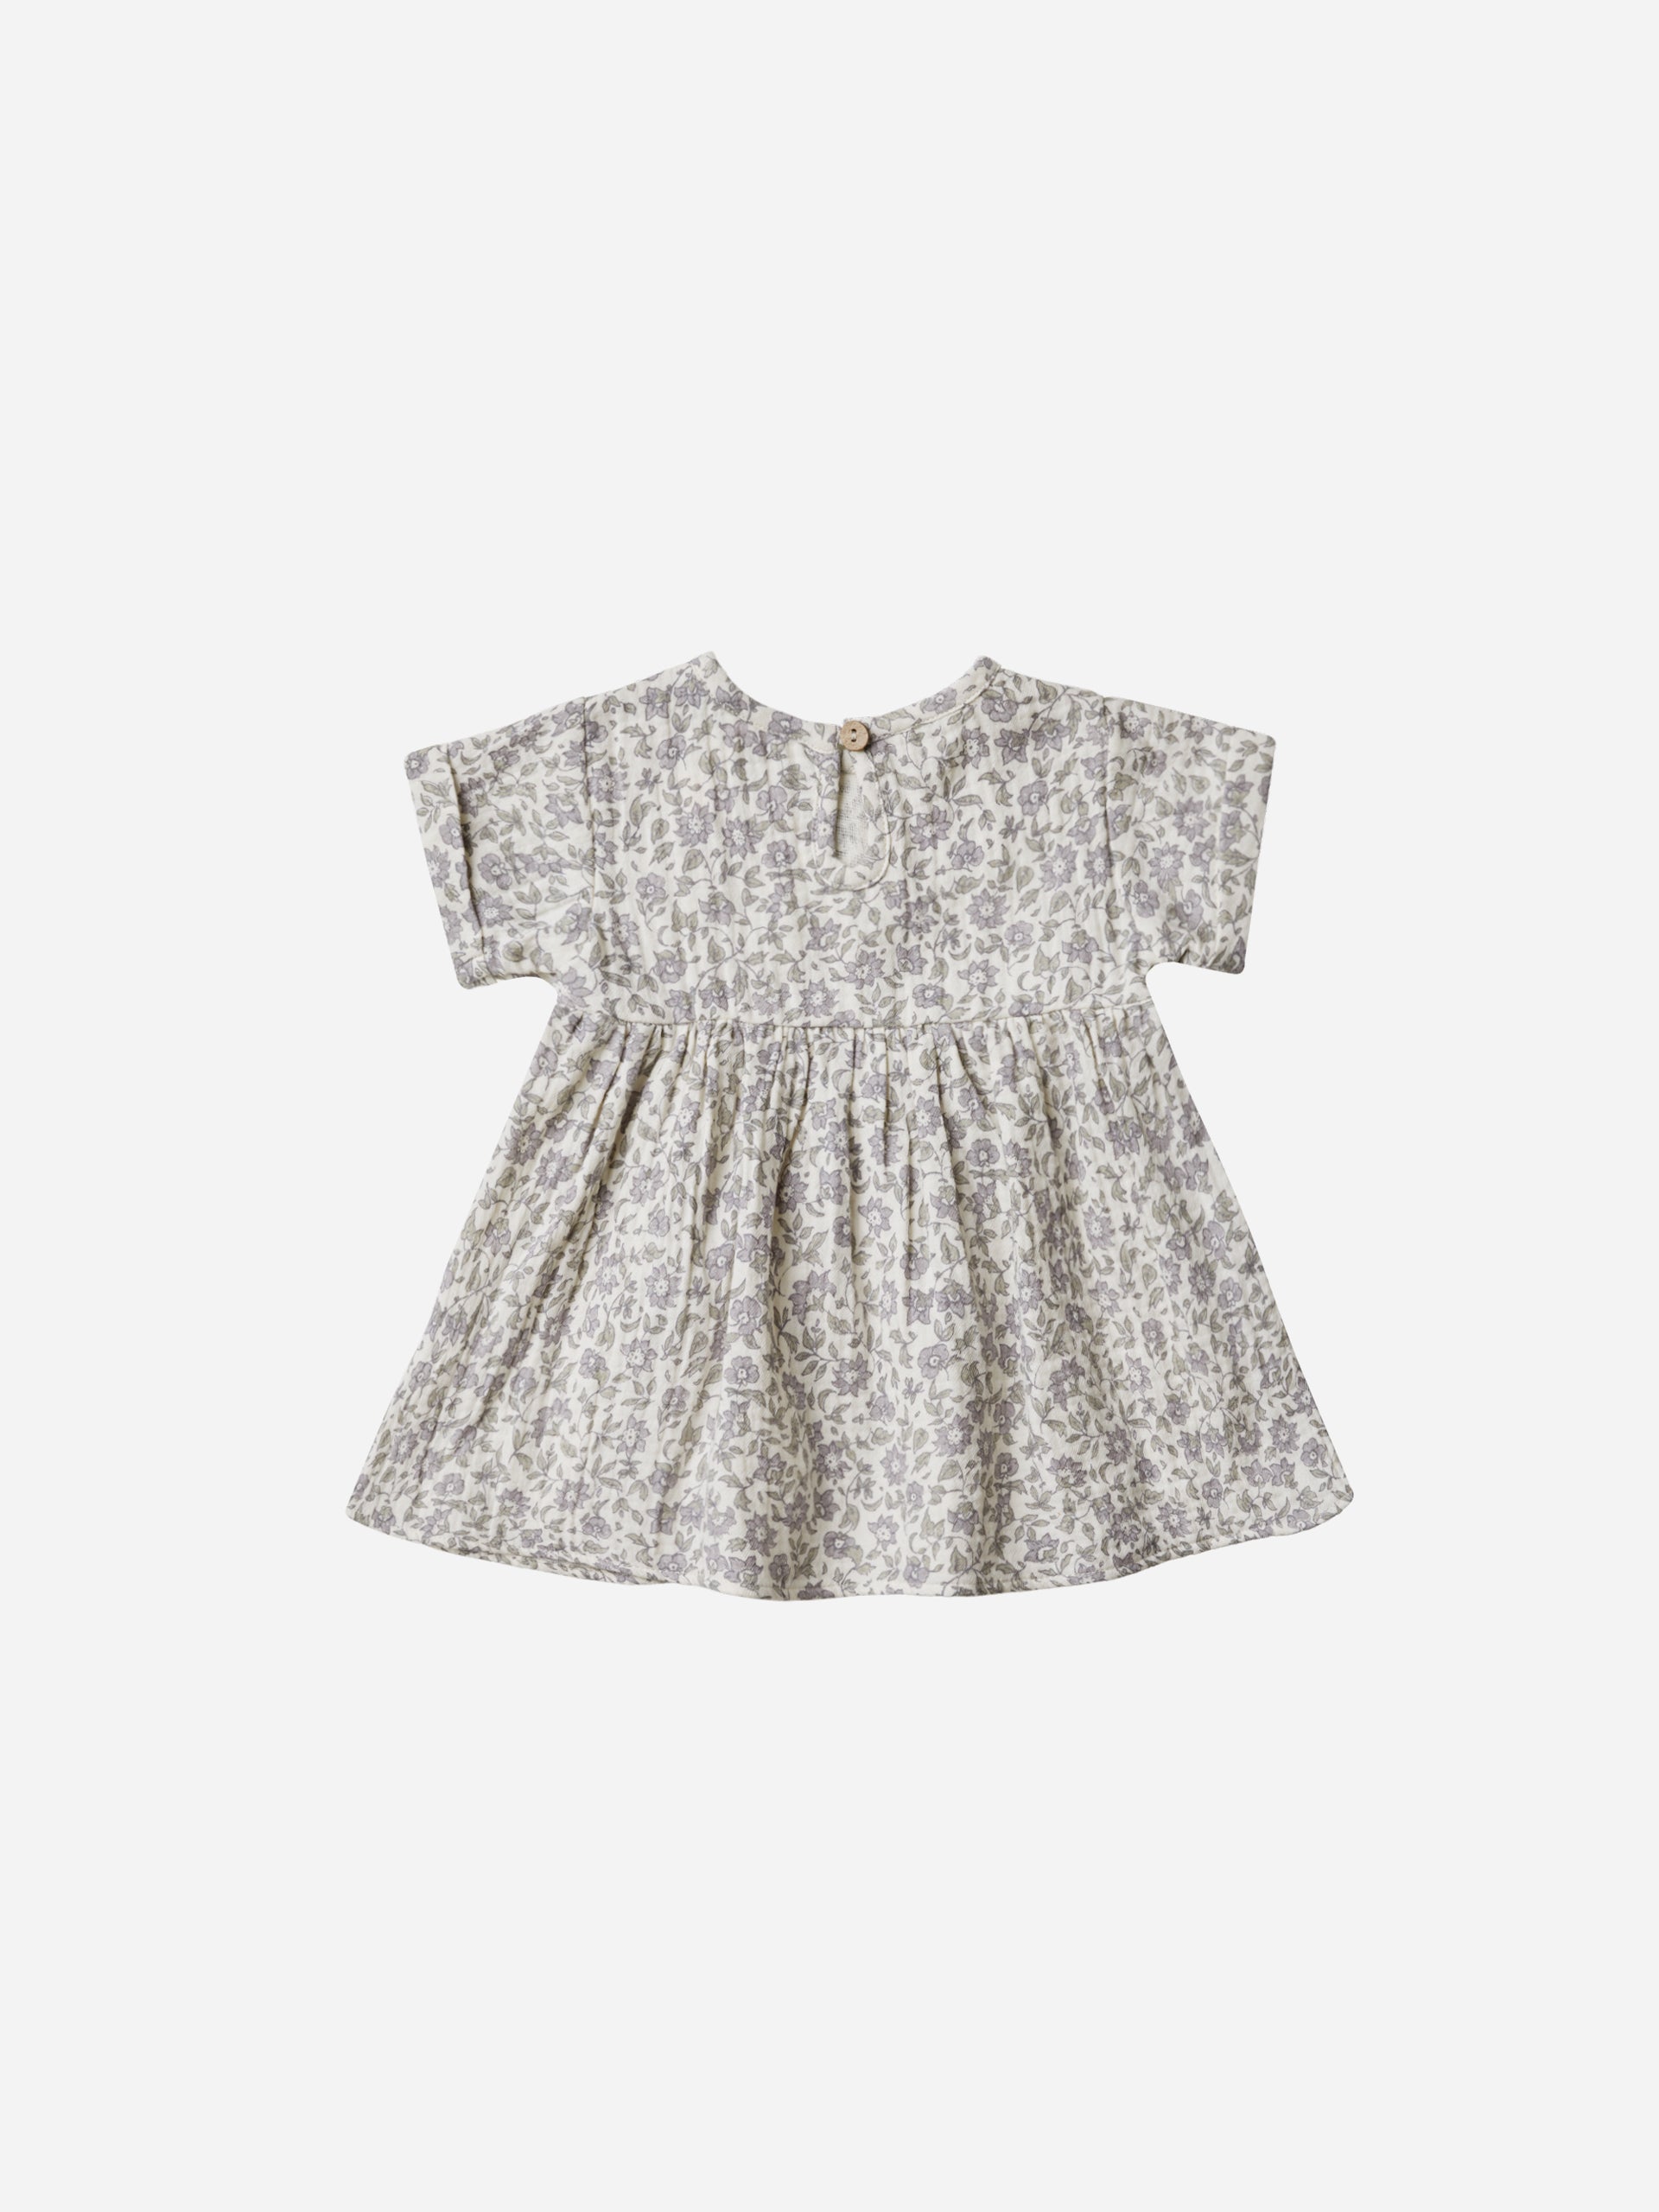 Brielle Dress || French Garden - Rylee + Cru | Kids Clothes | Trendy Baby Clothes | Modern Infant Outfits |